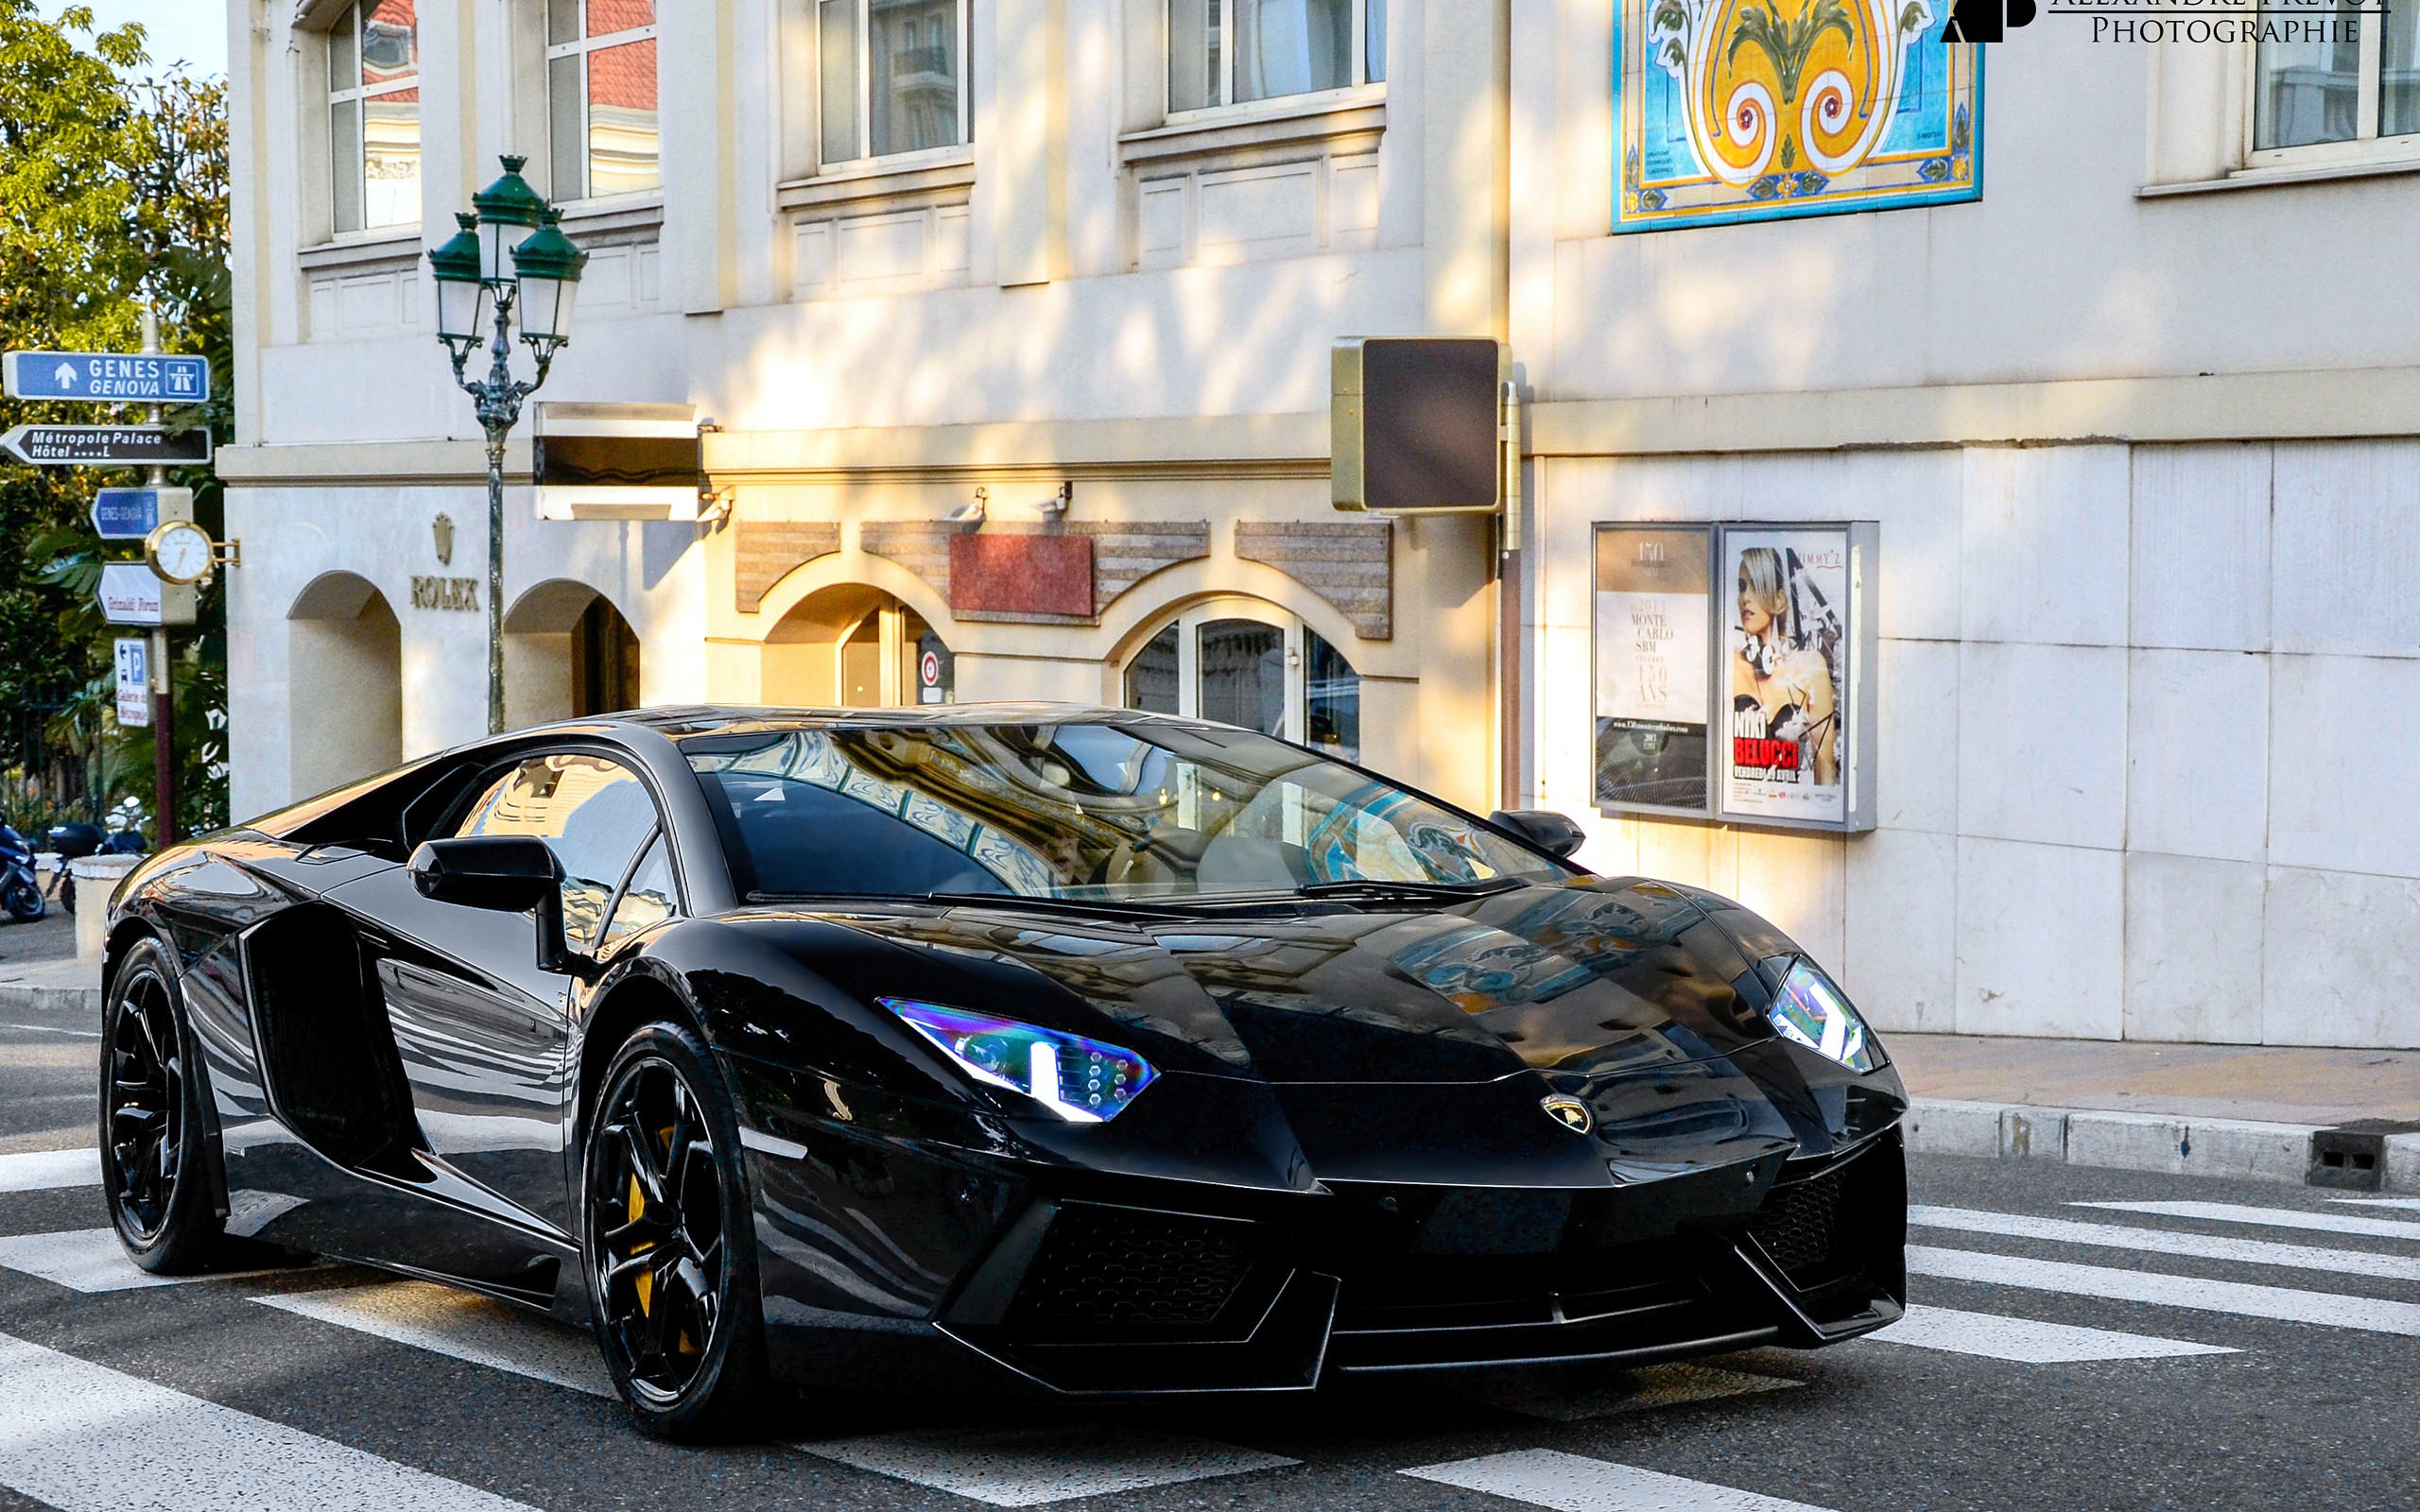 Lamborghini Aventador pictures on HD wallpapers.Only model